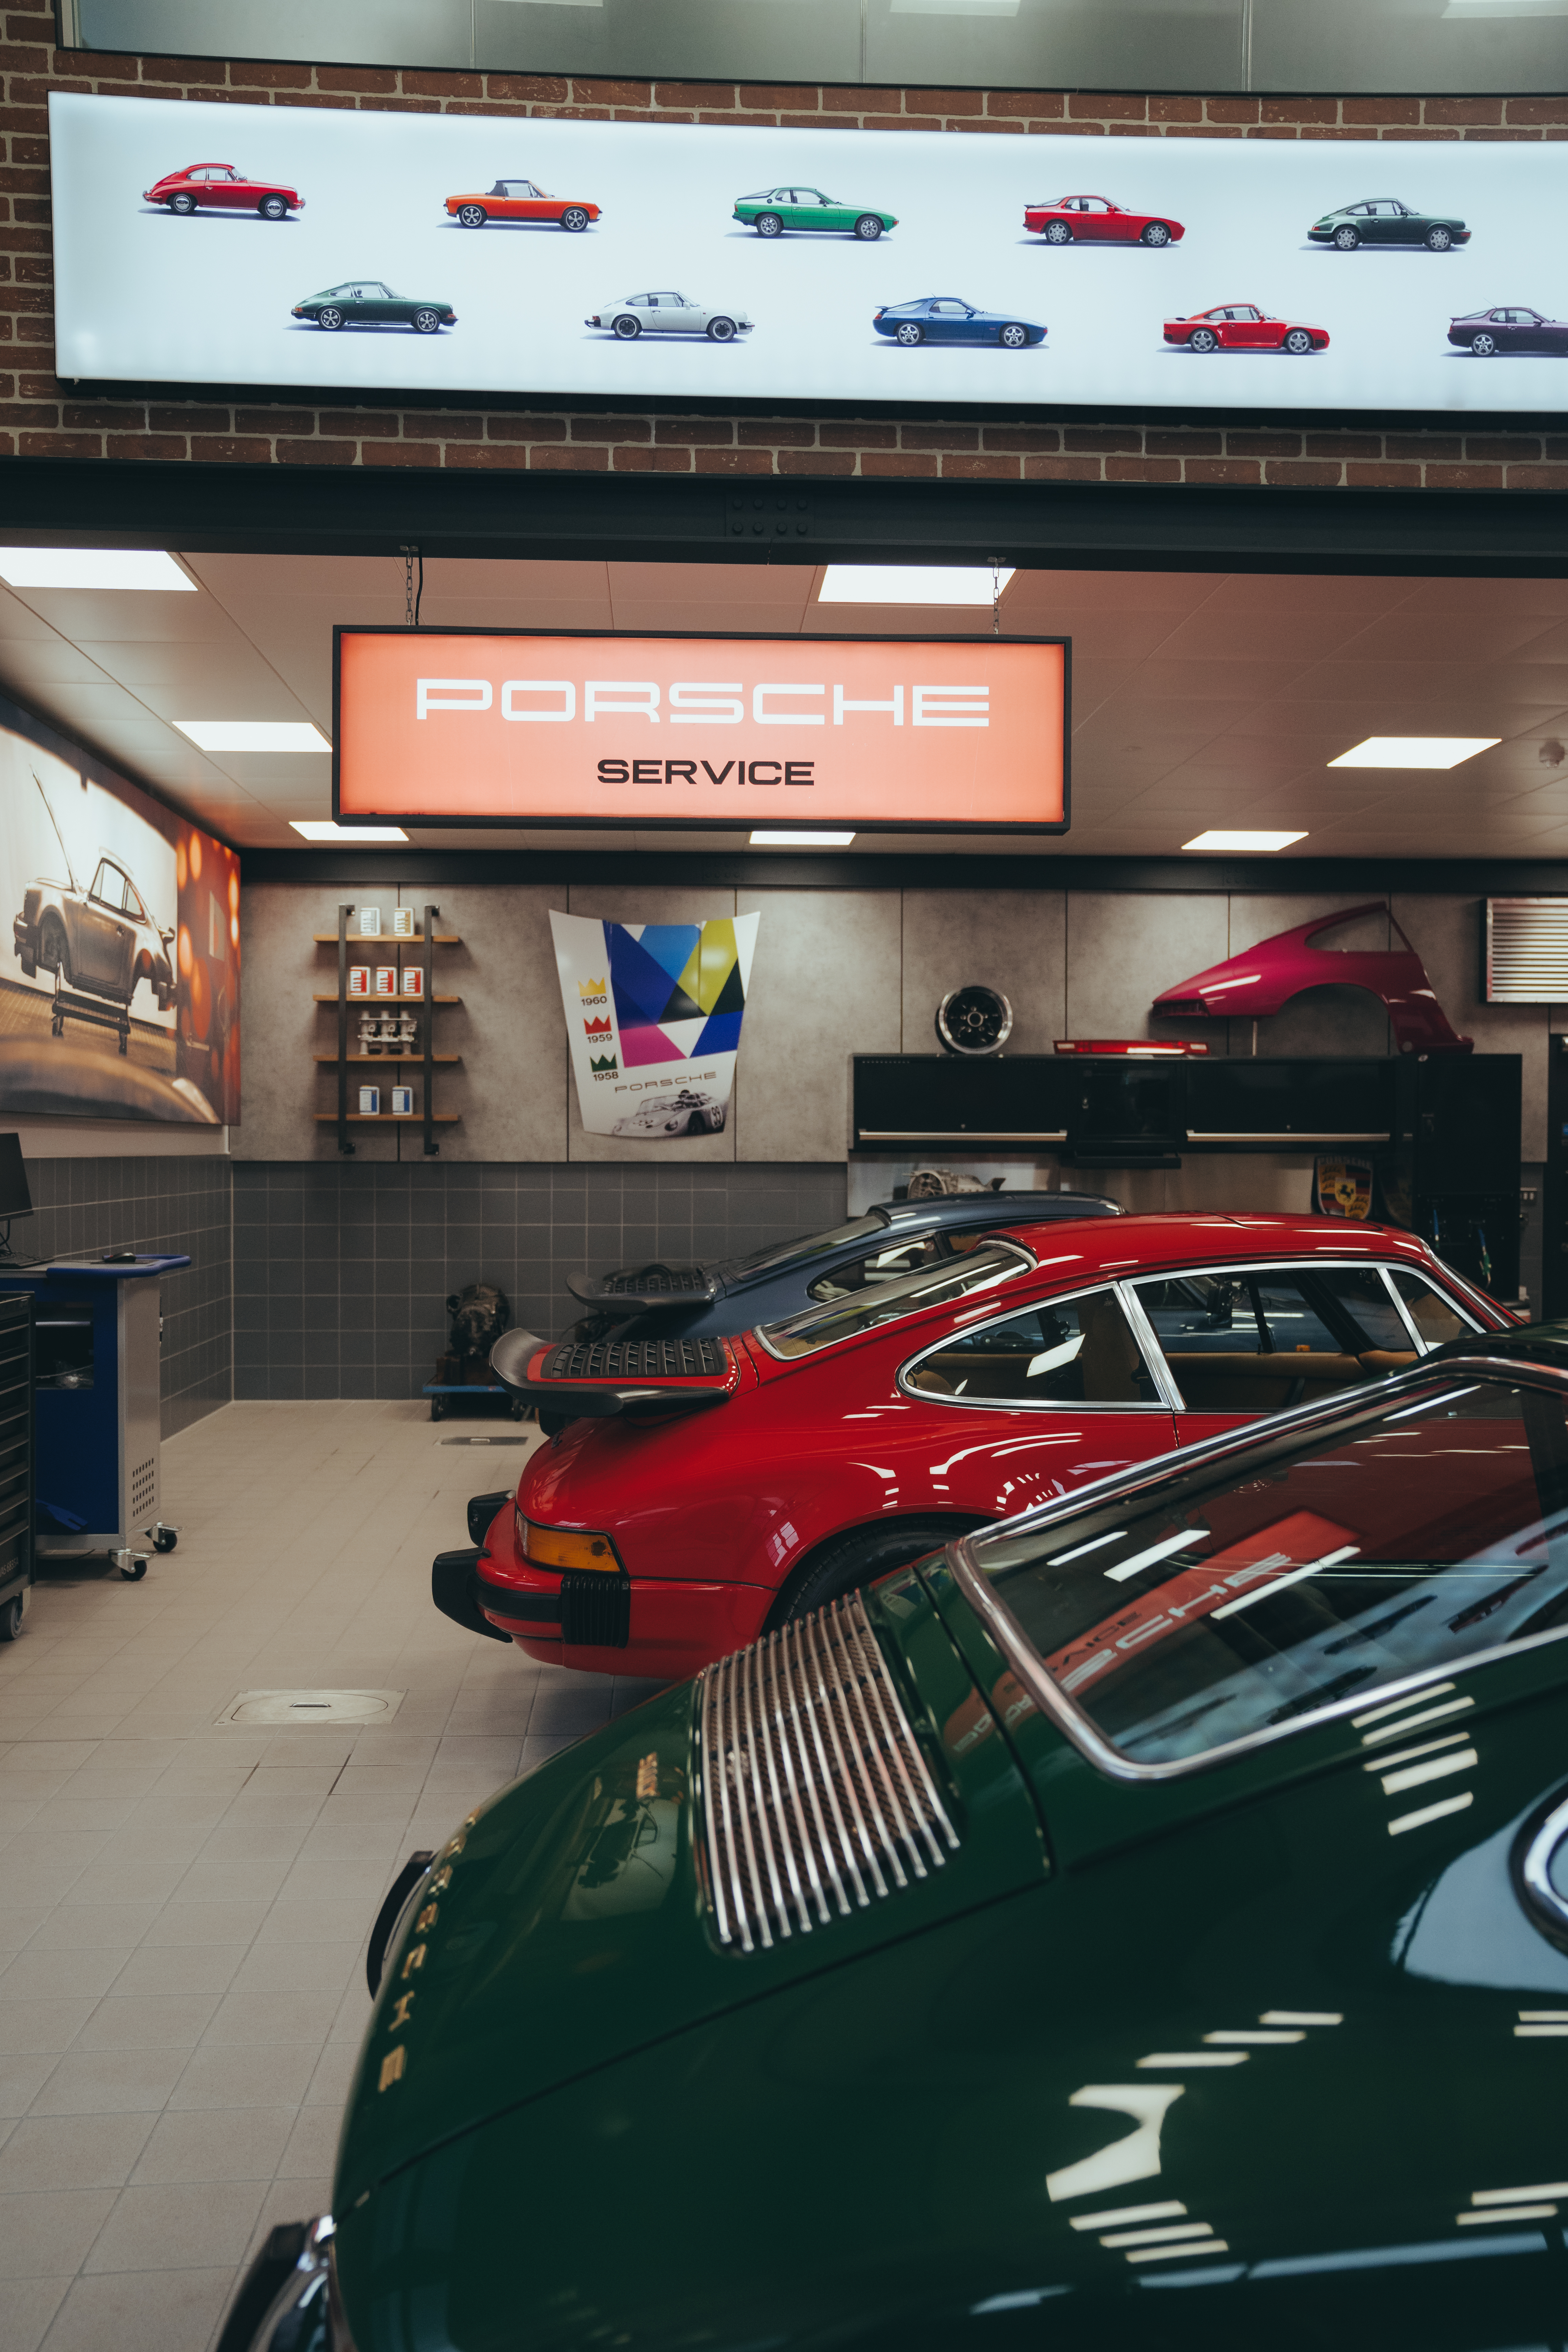 Line of classic Porsche 911 cars in a workshop